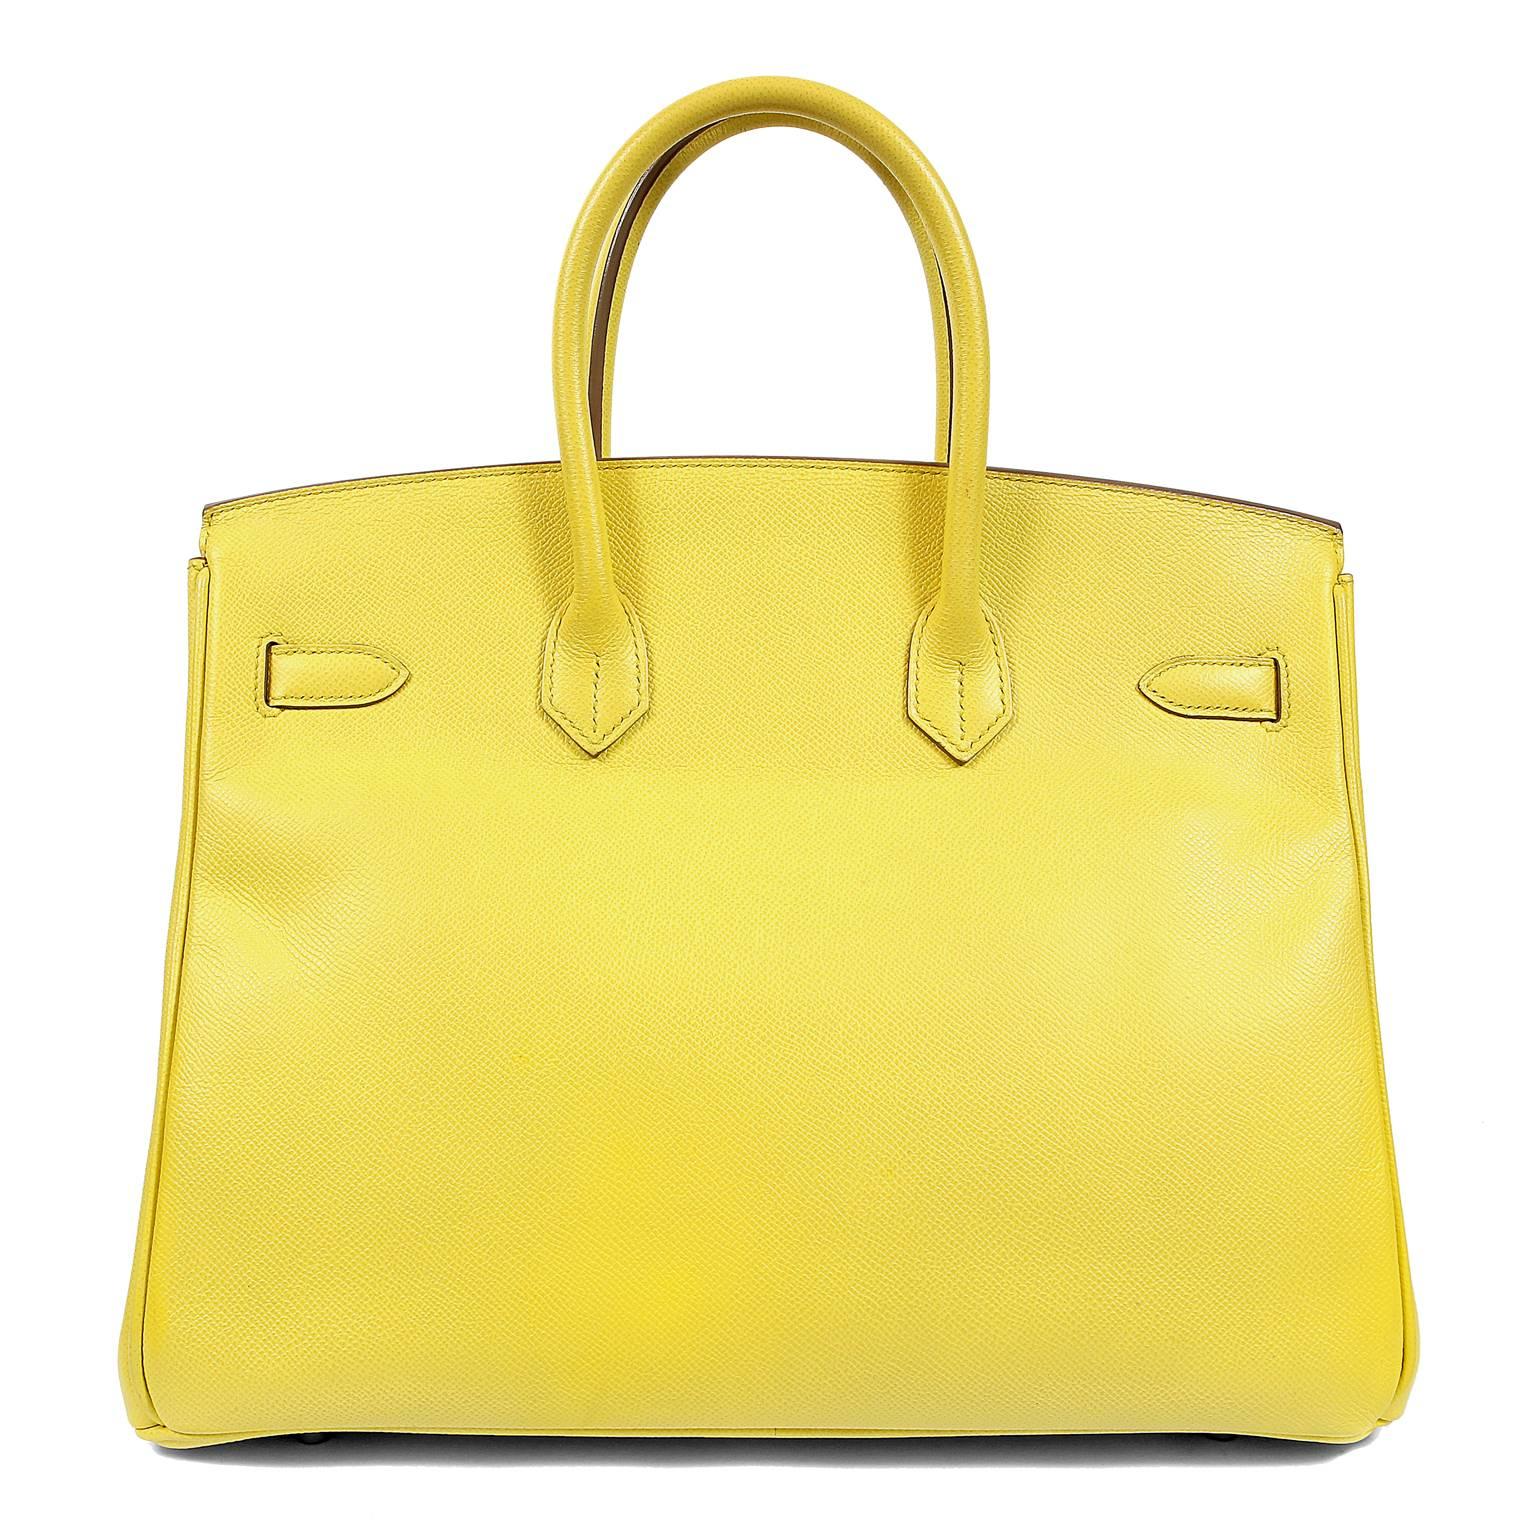 This authentic Hermès Soufre Epsom 35 cm Birkin is in pristine condition.    Considered the ultimate luxury item, the Hermès Birkin is stitched by hand. Waitlists are commonplace.   Soufre (“sulfur” in English) is a bright yellow pop of color that